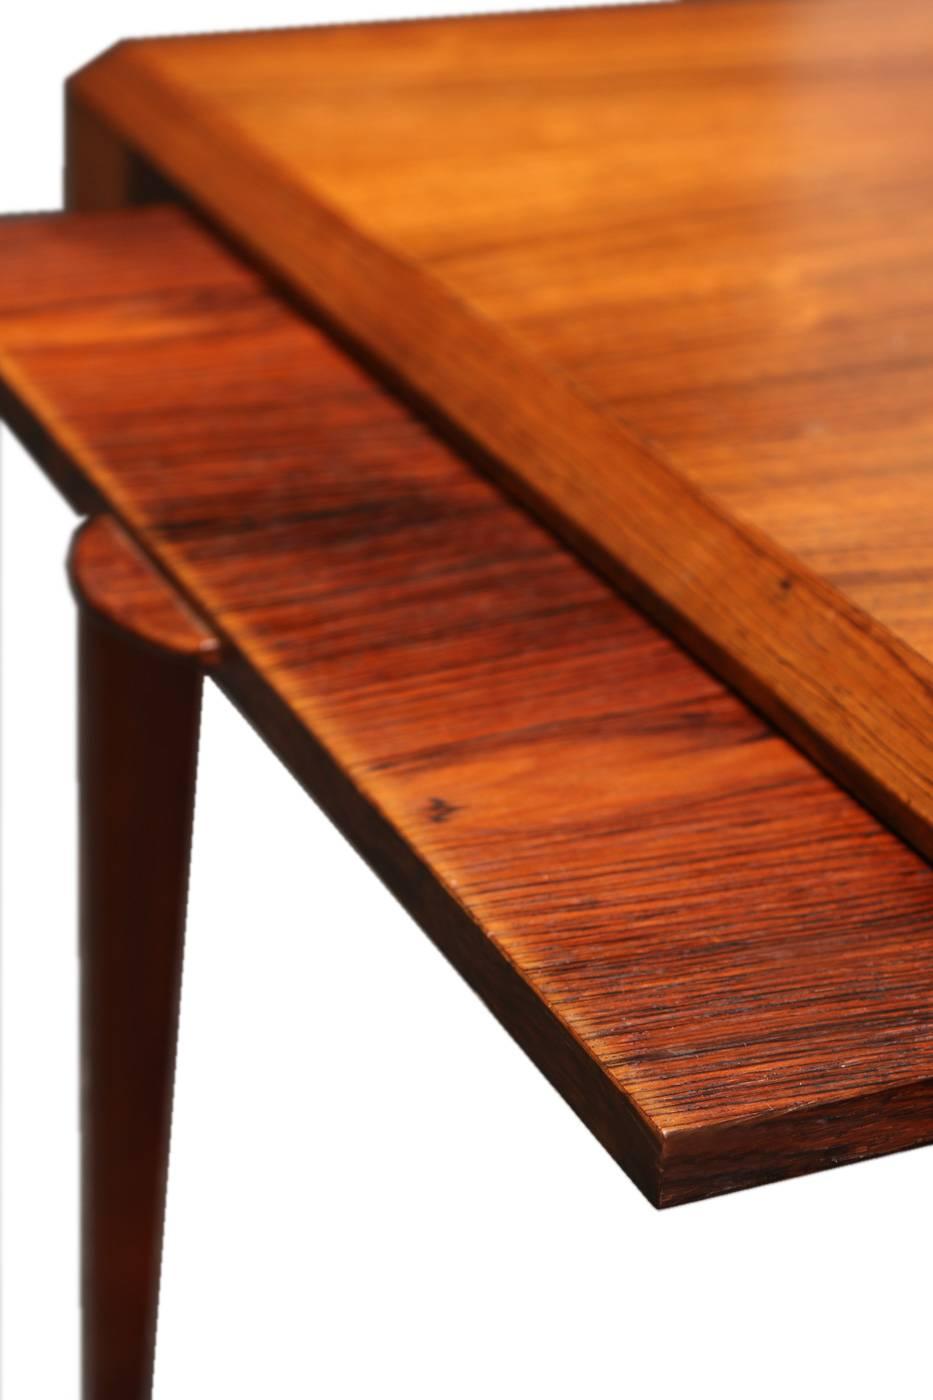 A rare coffee table designed by the Danish designer Johannes Andersen during the 1960s, manufactured by CFC Silkeborg in Denmark. It is made from Brazilian rosewood with veneered tops. It features slanted edges and extendable side elements. One of